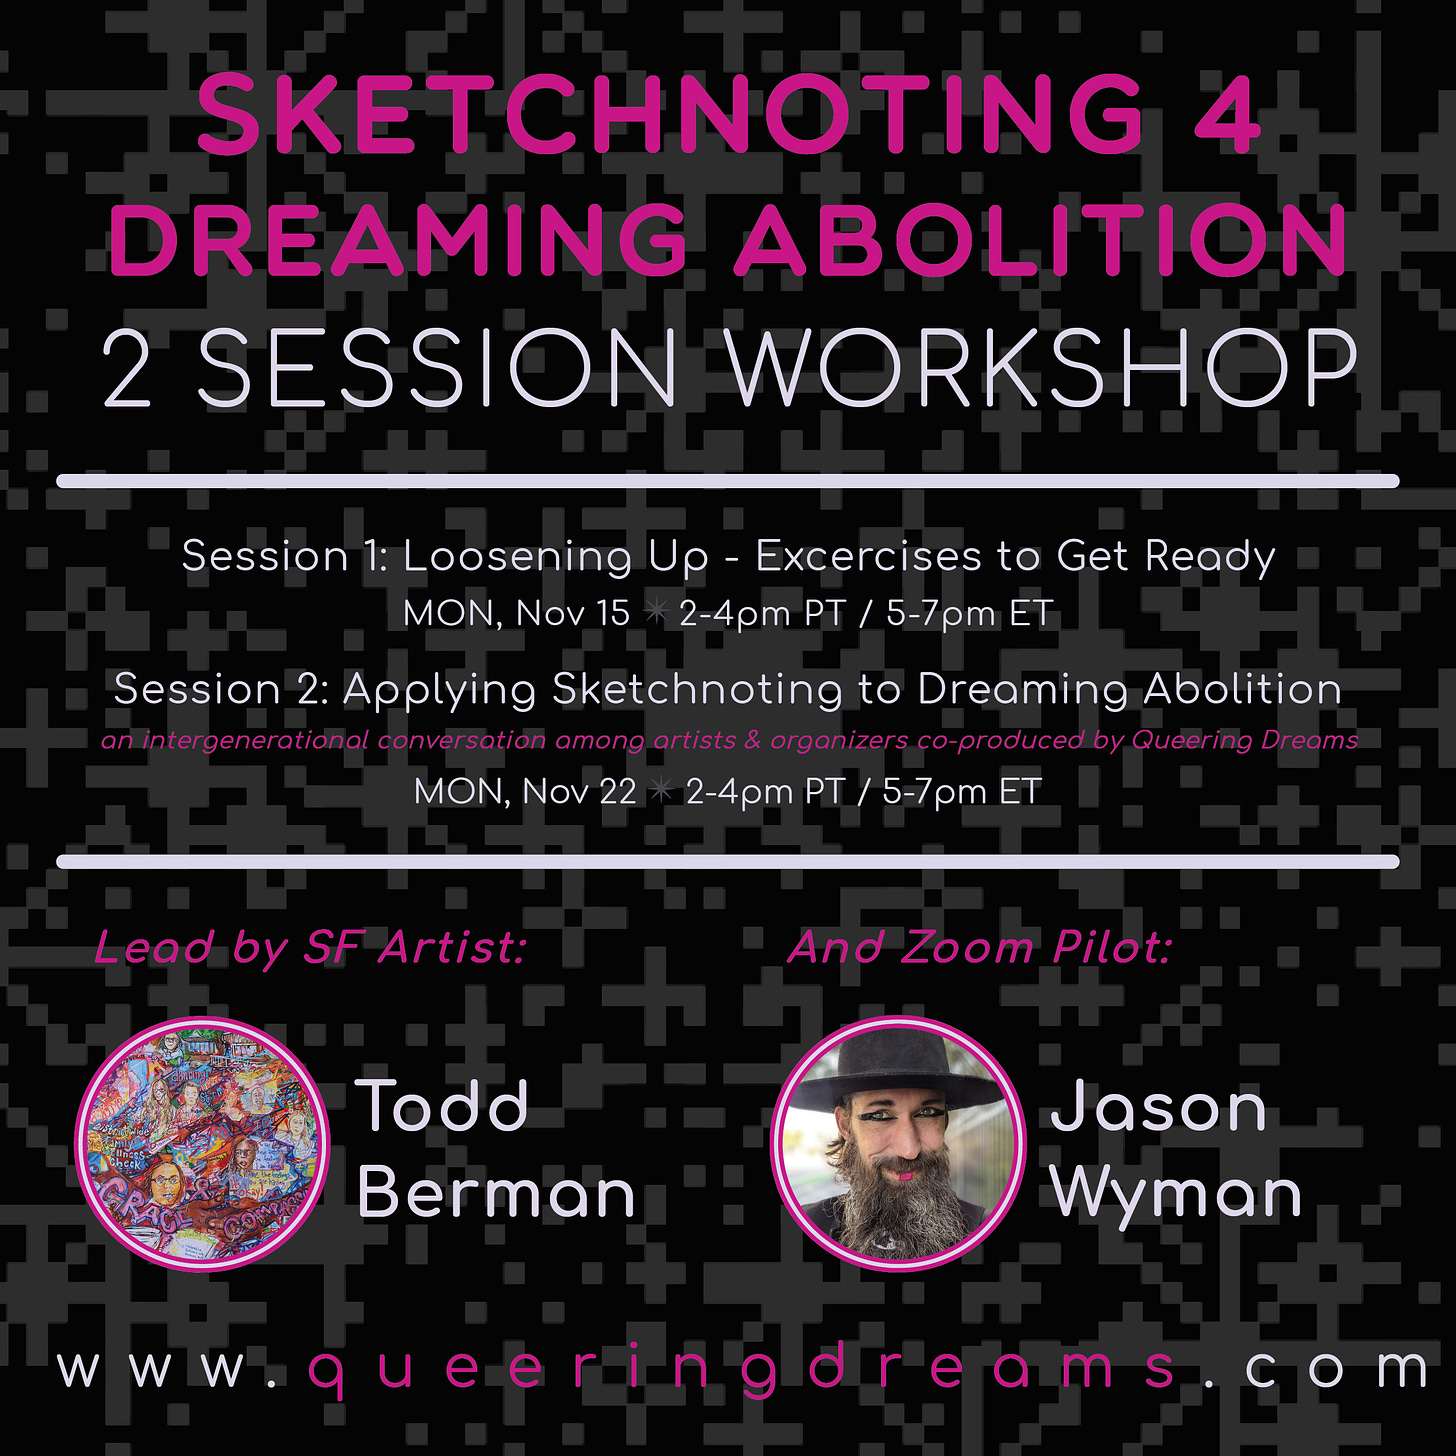 Text-based digital flyer for Sketchnoting for Dreaming Abolition set against a pixelated background. The predominate colors are pink, white, and black. 